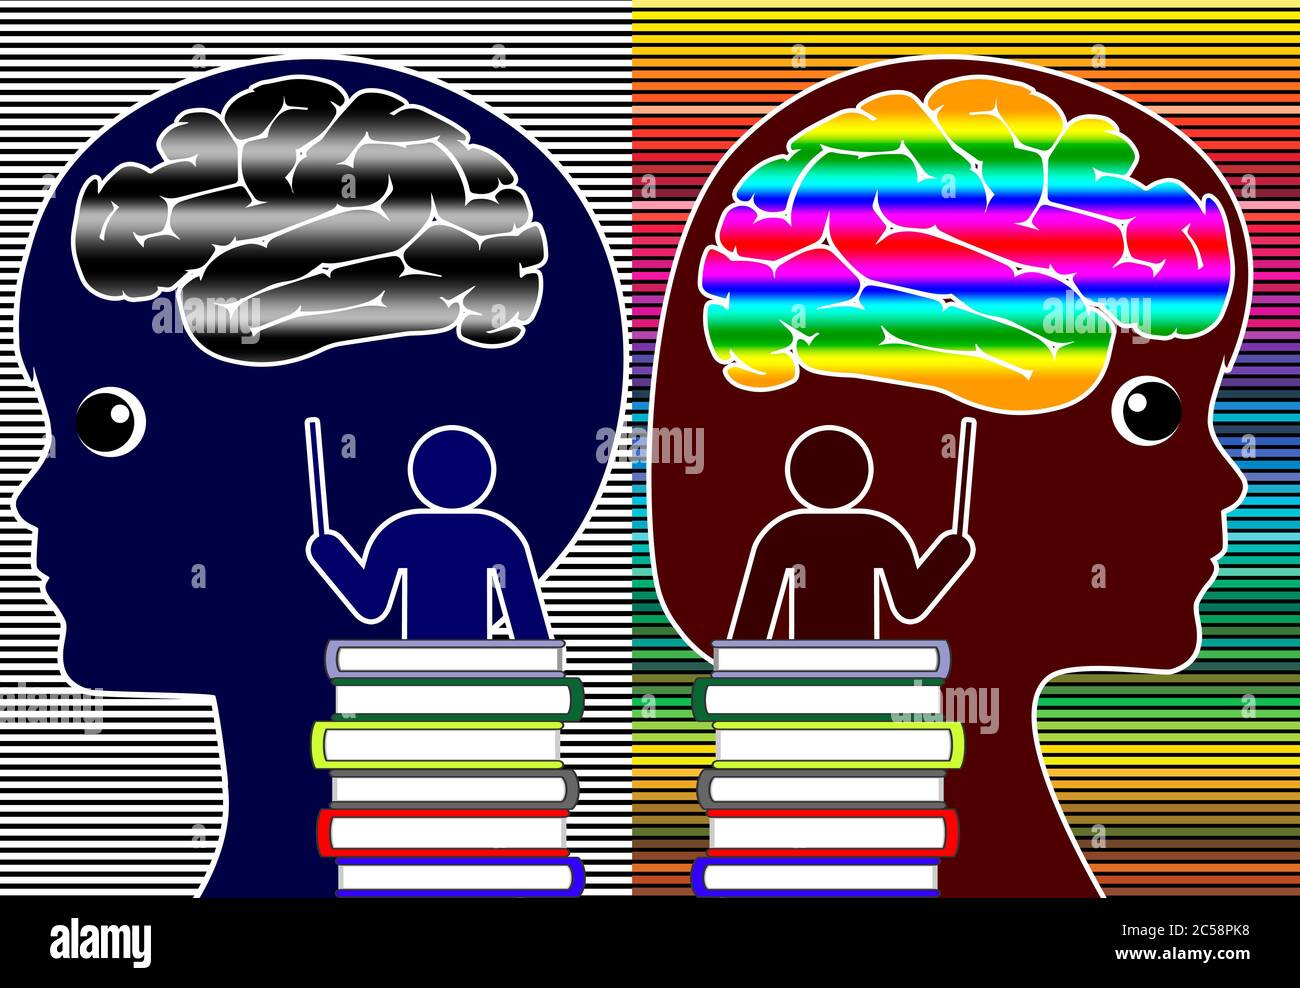 Academic and cognitive differences in the classroom due to different mindsets. Stock Photo